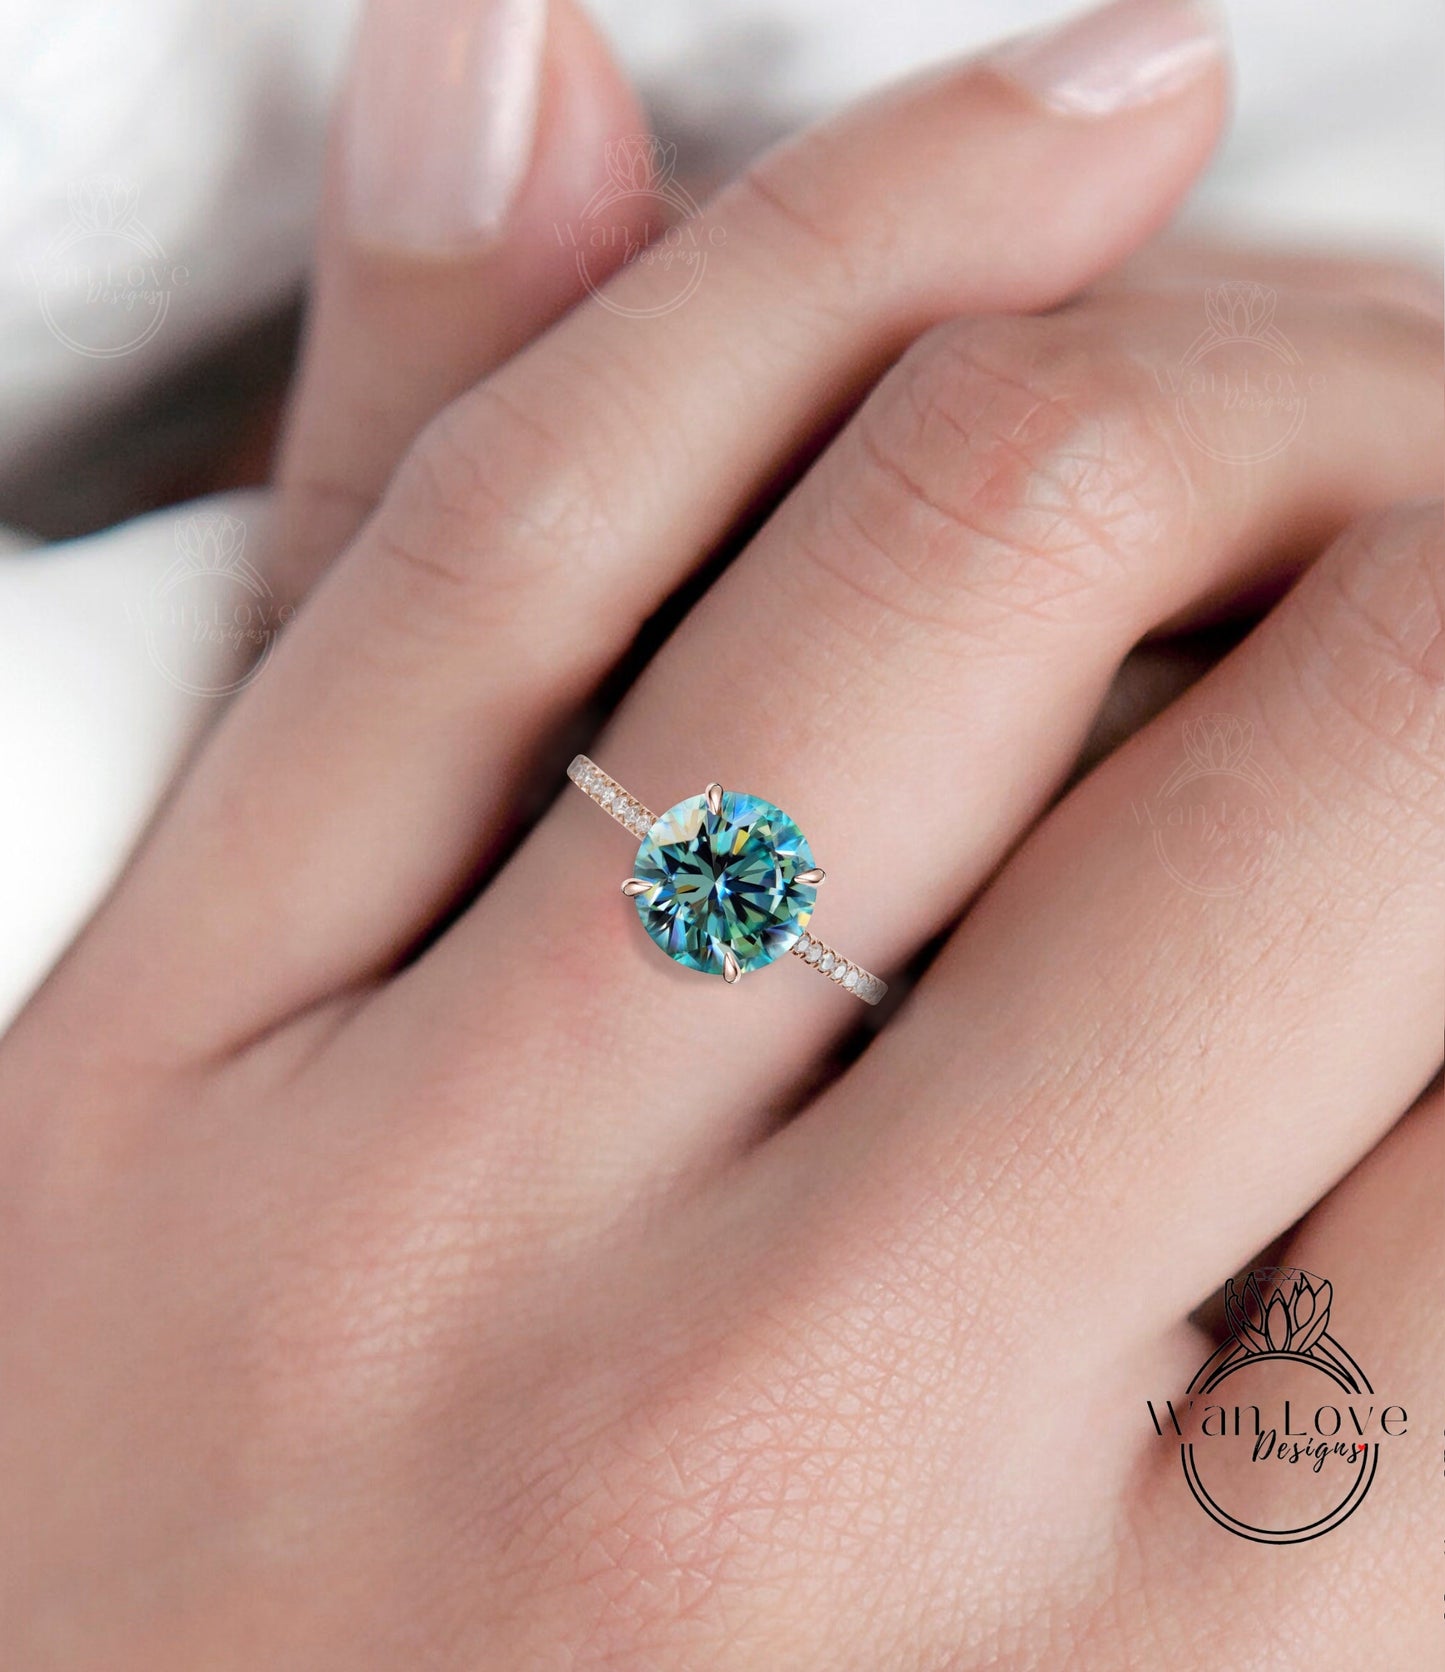 Teal Blue Green Moissanite & Diamond Side Halo Round Engagement Ring Half Eternity Art Deco gold vintage Ring antique wedding bridal promise ring Wan Love Designs